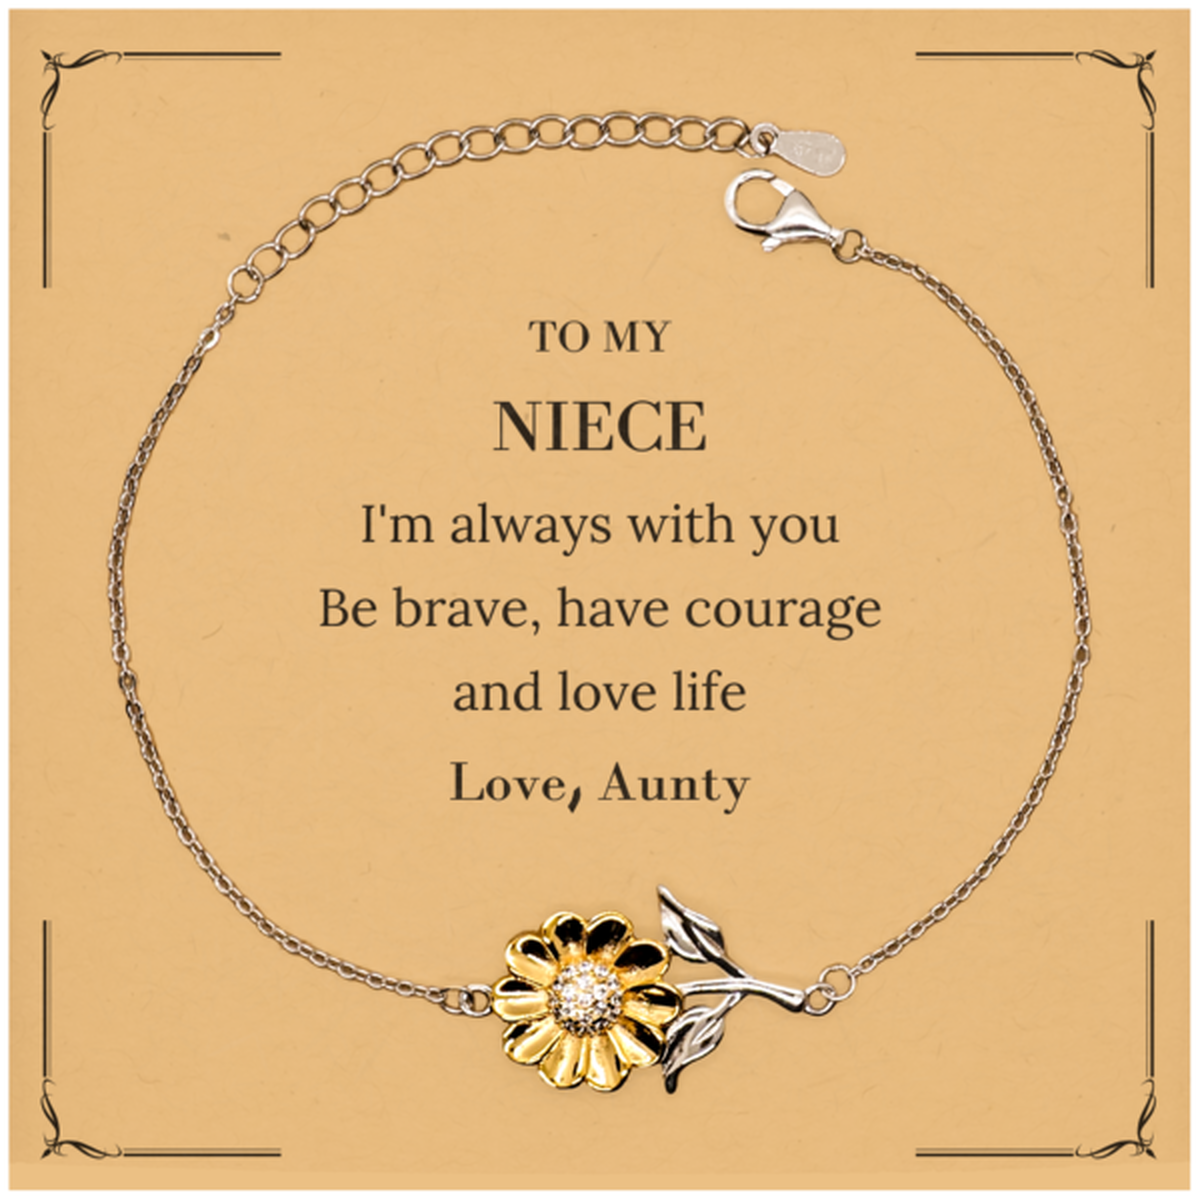 To My Niece Gifts from Aunty, Unique Sunflower Bracelet Inspirational Christmas Birthday Graduation Gifts for Niece I'm always with you. Be brave, have courage and love life. Love, Aunty